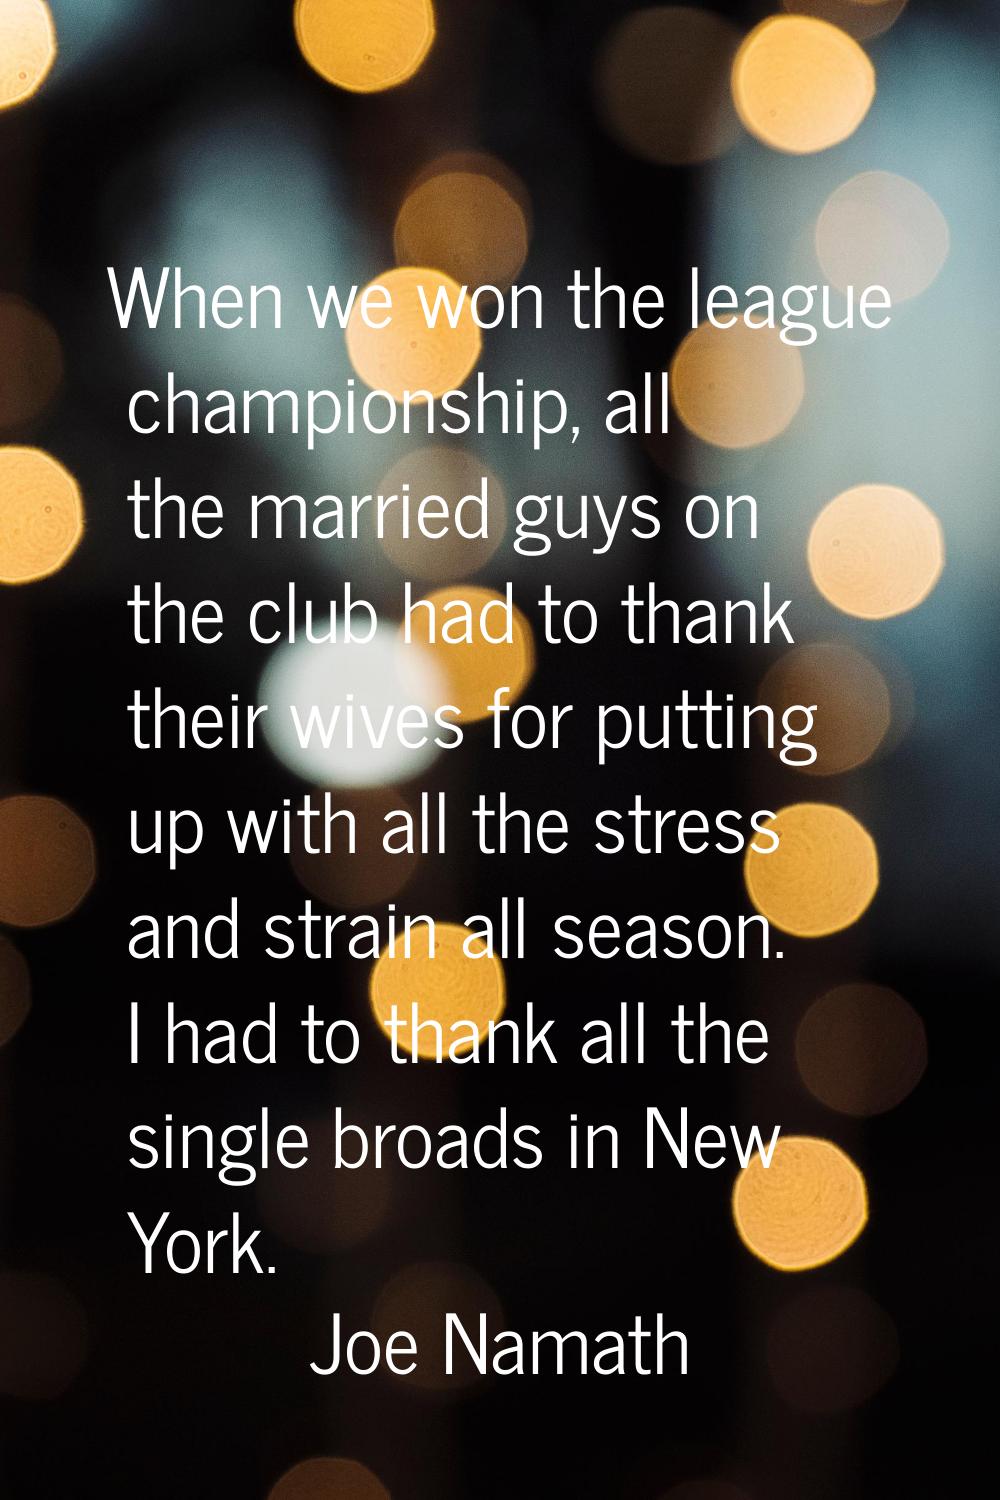 When we won the league championship, all the married guys on the club had to thank their wives for 